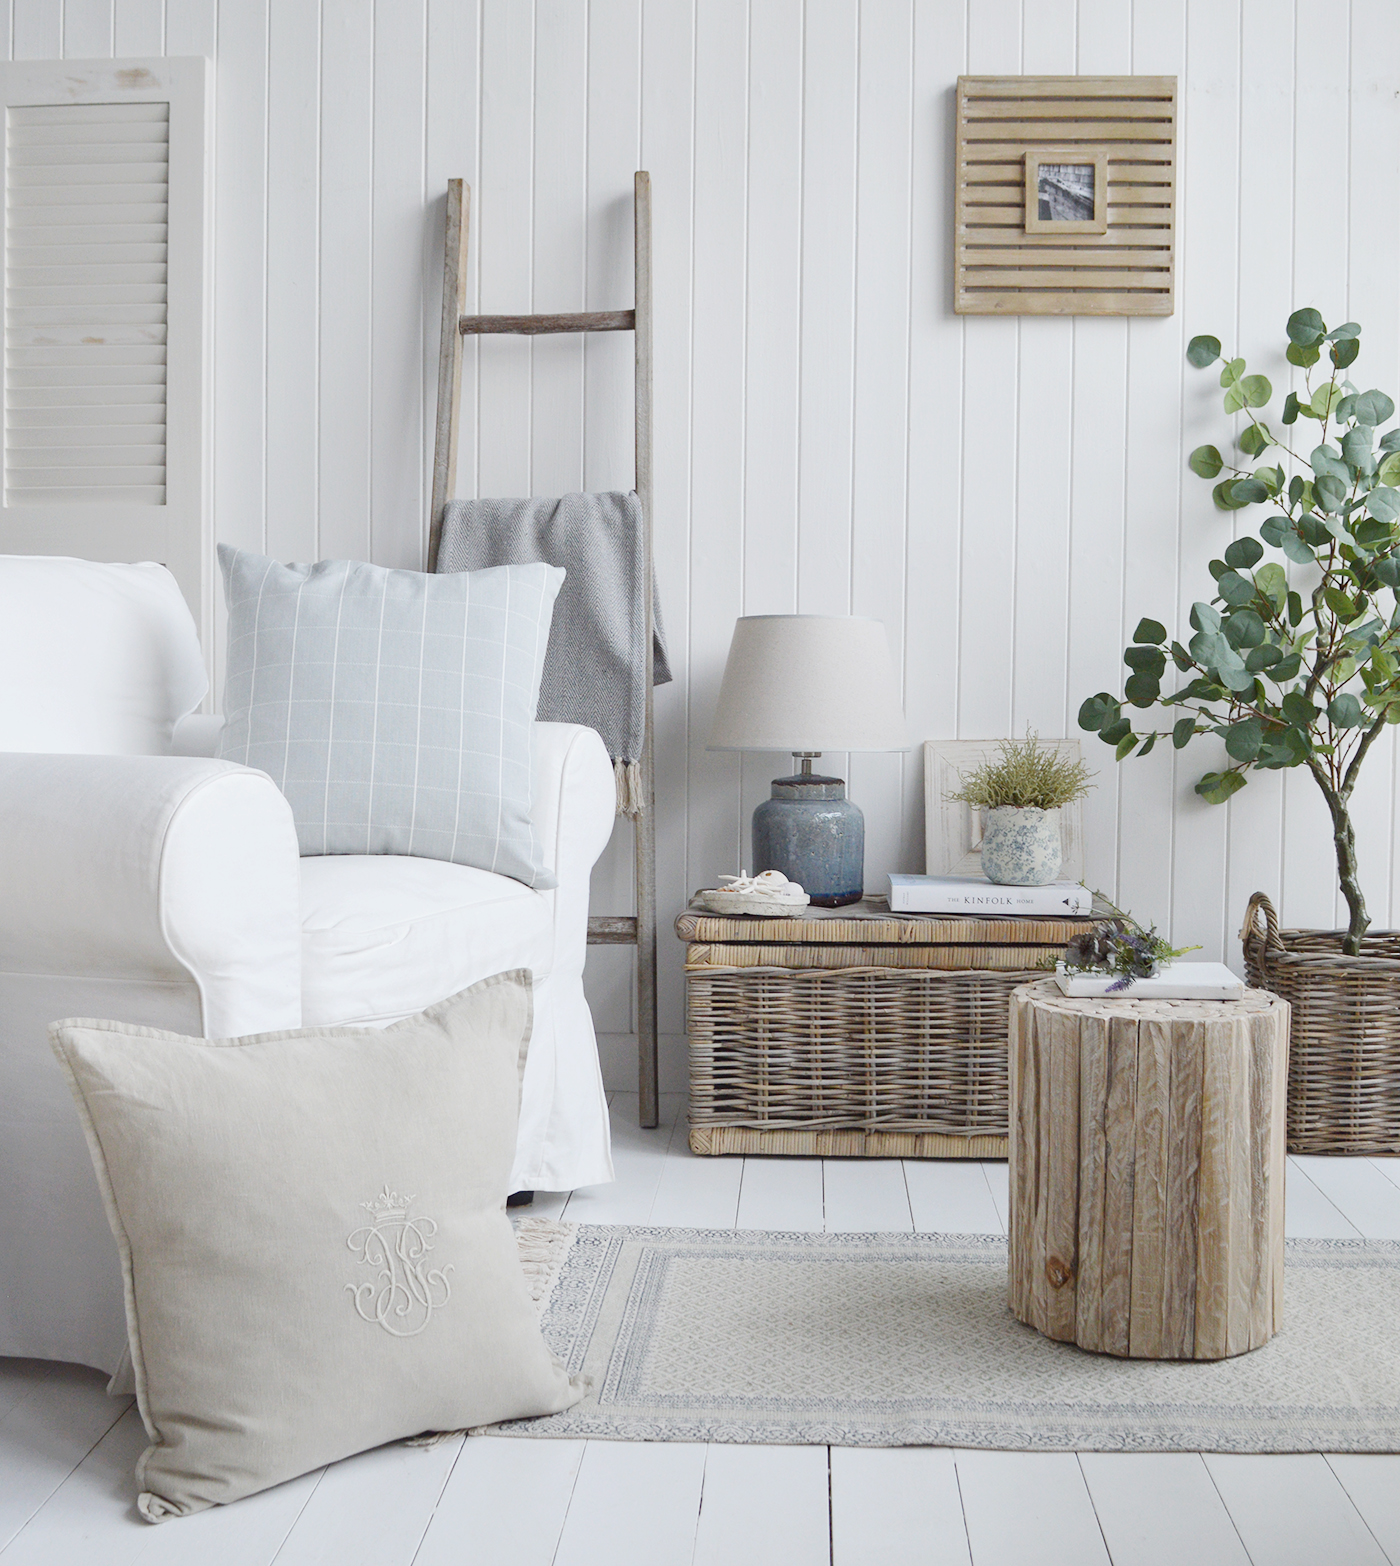 New England and Hamptons interiors in UK. Coastal furniture with luxury cushions for softness, baskets for texture, natural wood pieces of furniture for warmth and a touch of faux greenery alongside the Blue Compton lamp and ceramic pieces